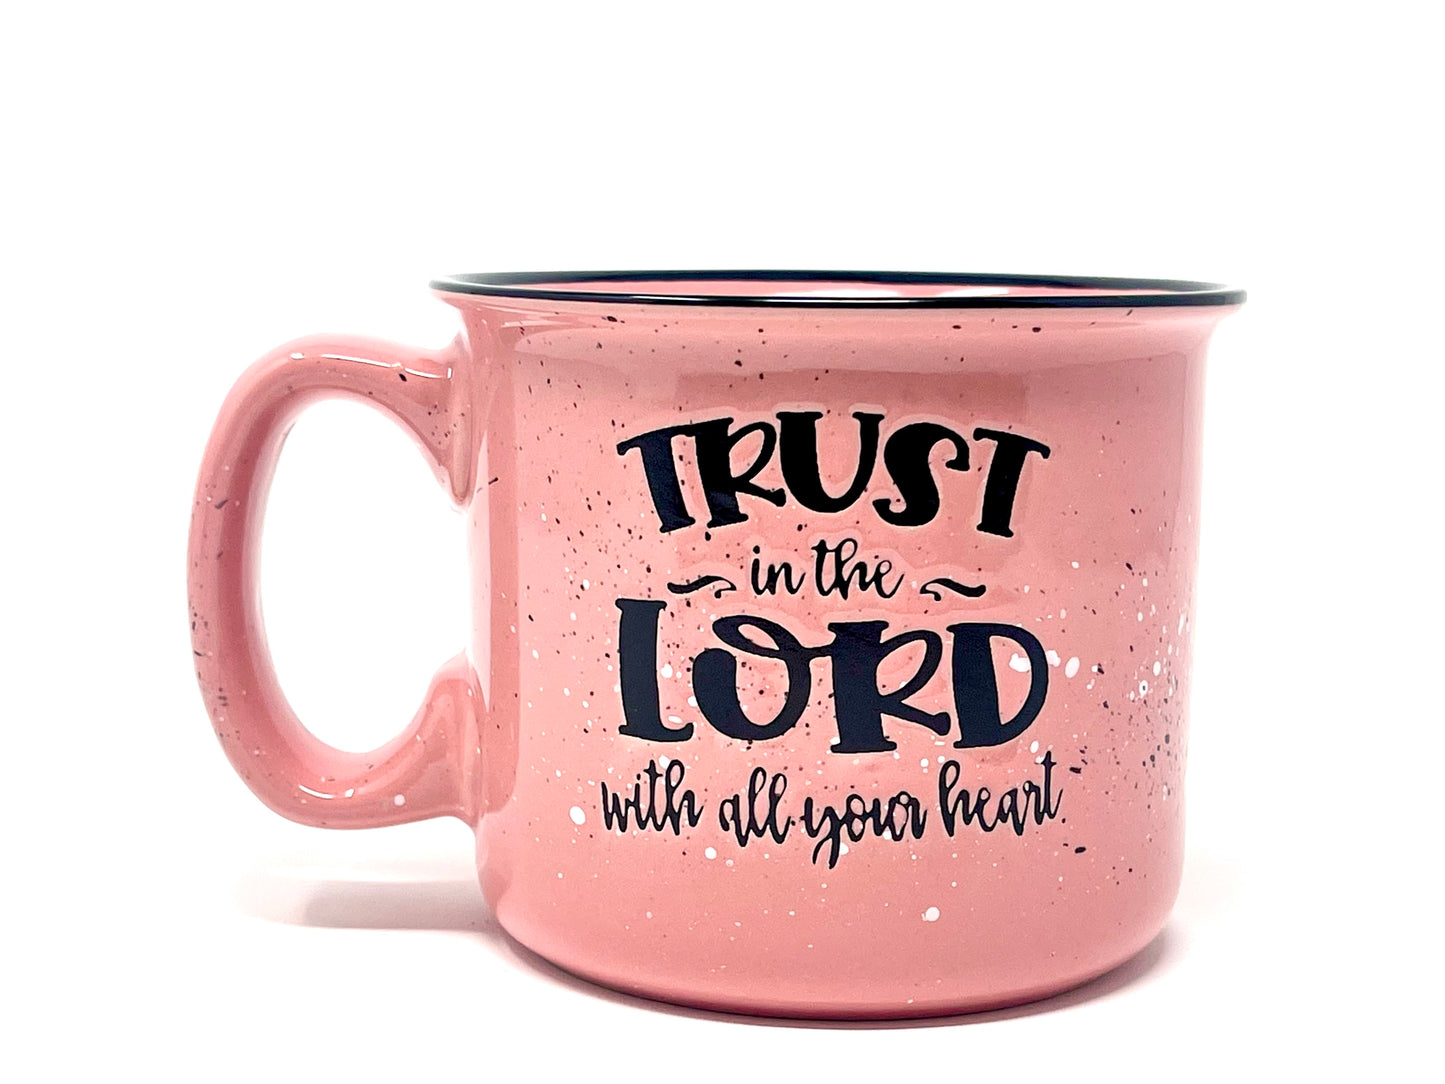 Trust in the Lord 15 oz Coral Ceramic Mug - Outlet Deal Utah